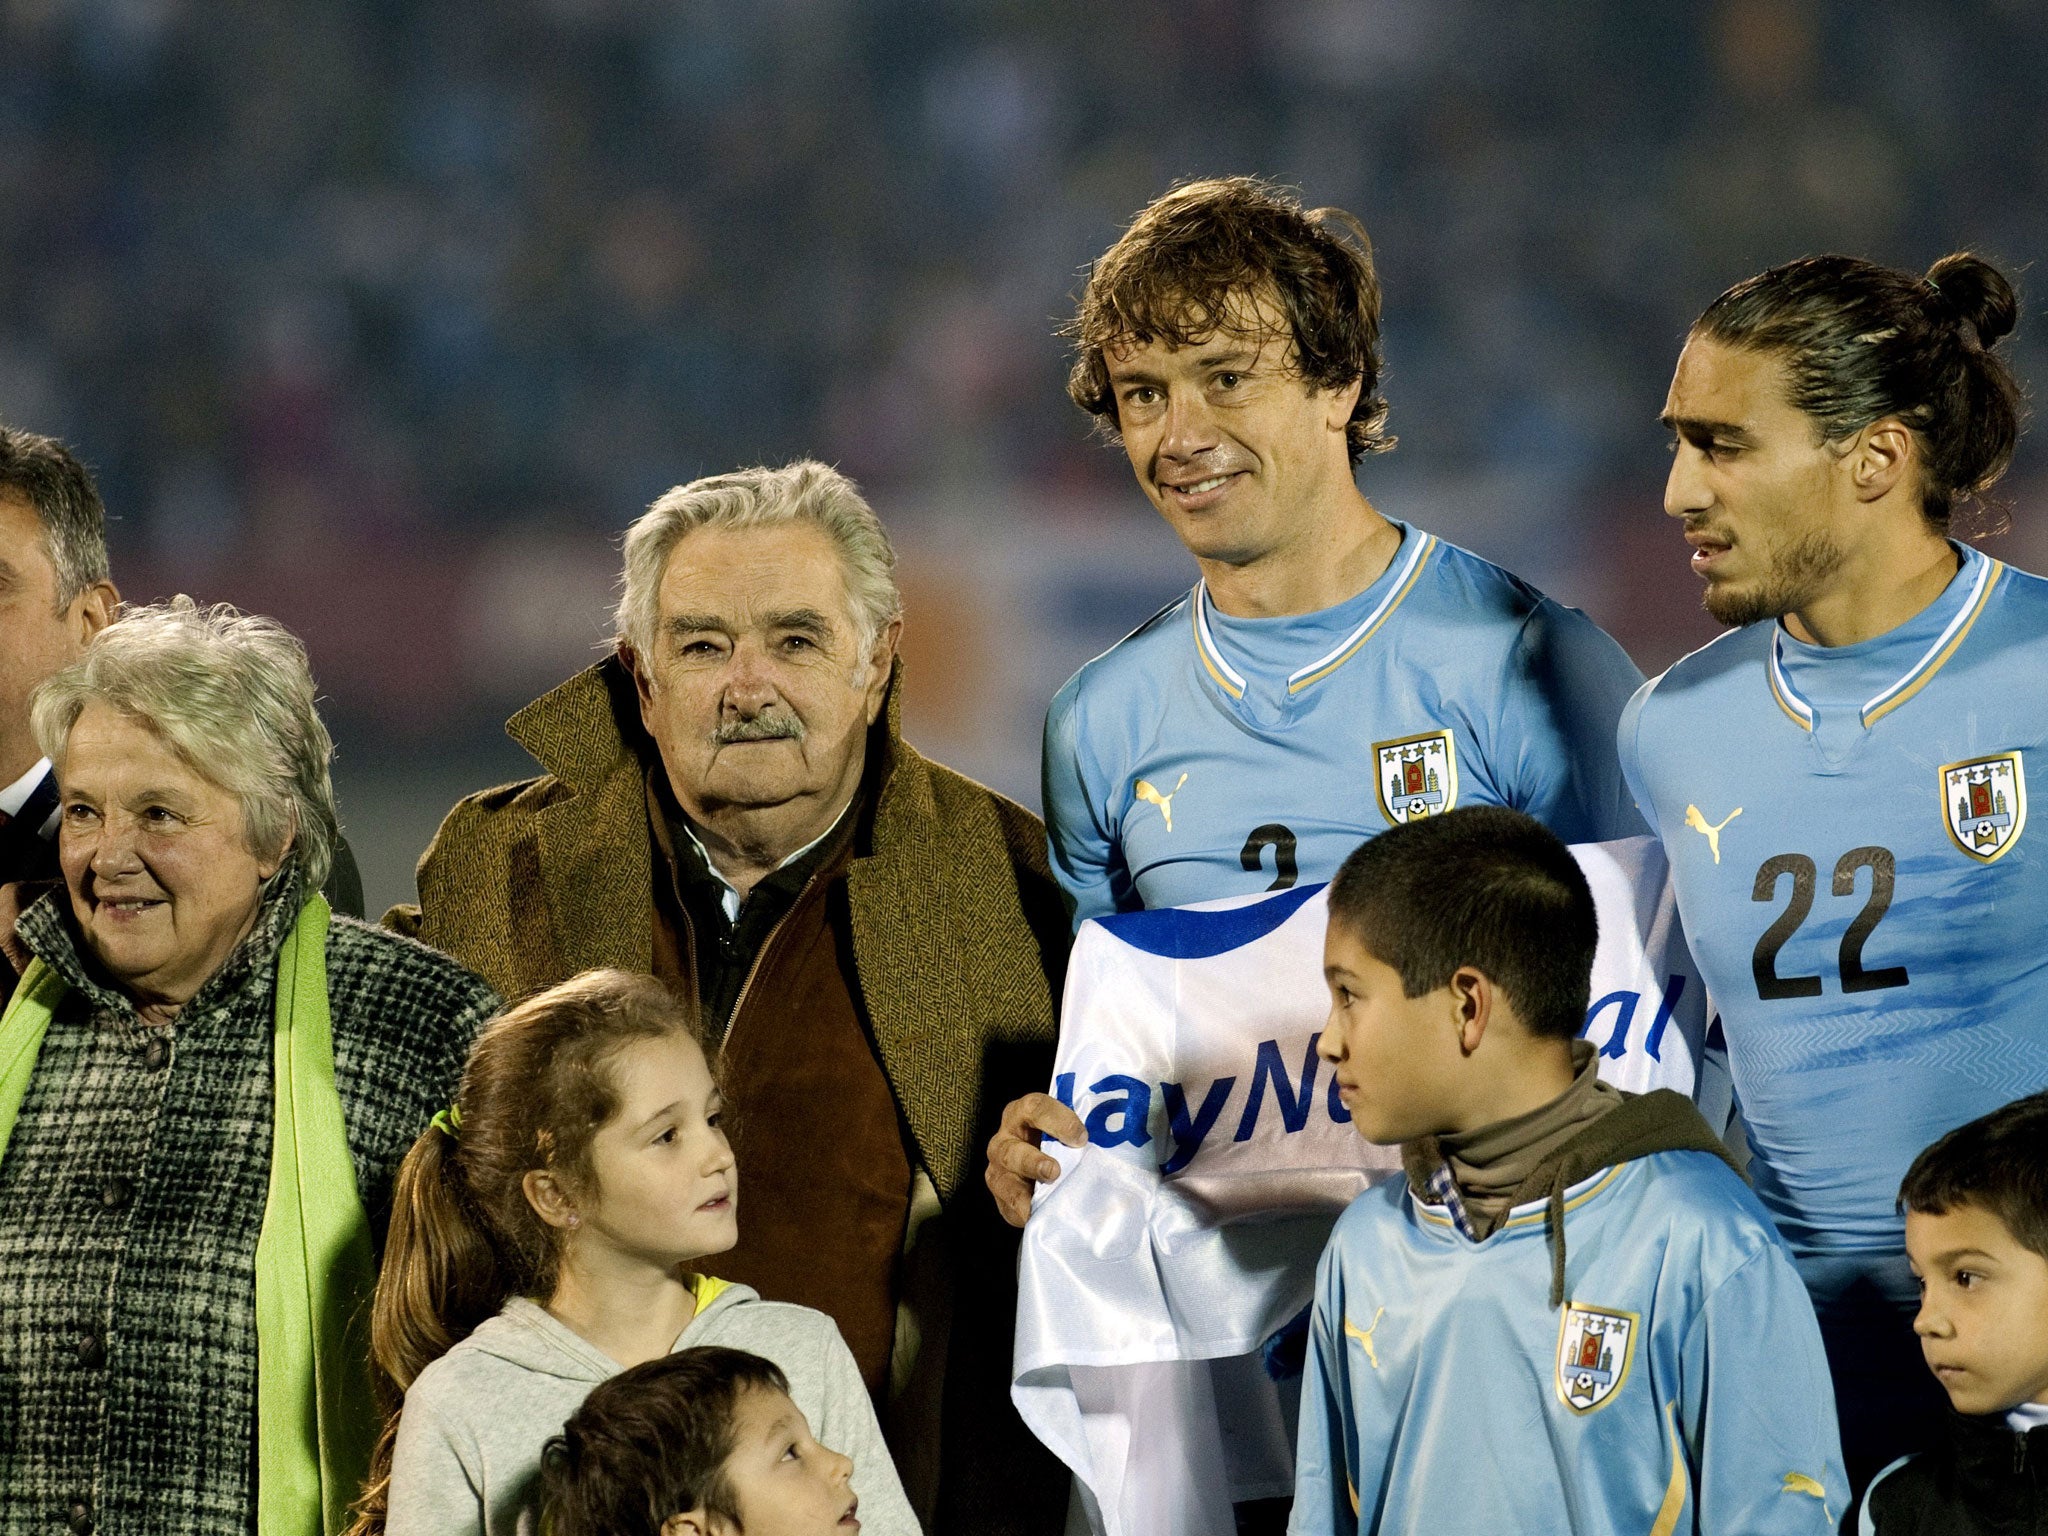 Uruguay's President Jose Mujica (3rd L) and his wife Lucia Topolansky (2nd L) stand next to Uruguay's footballers (L to R) Diego Lugano and Martin Caceres